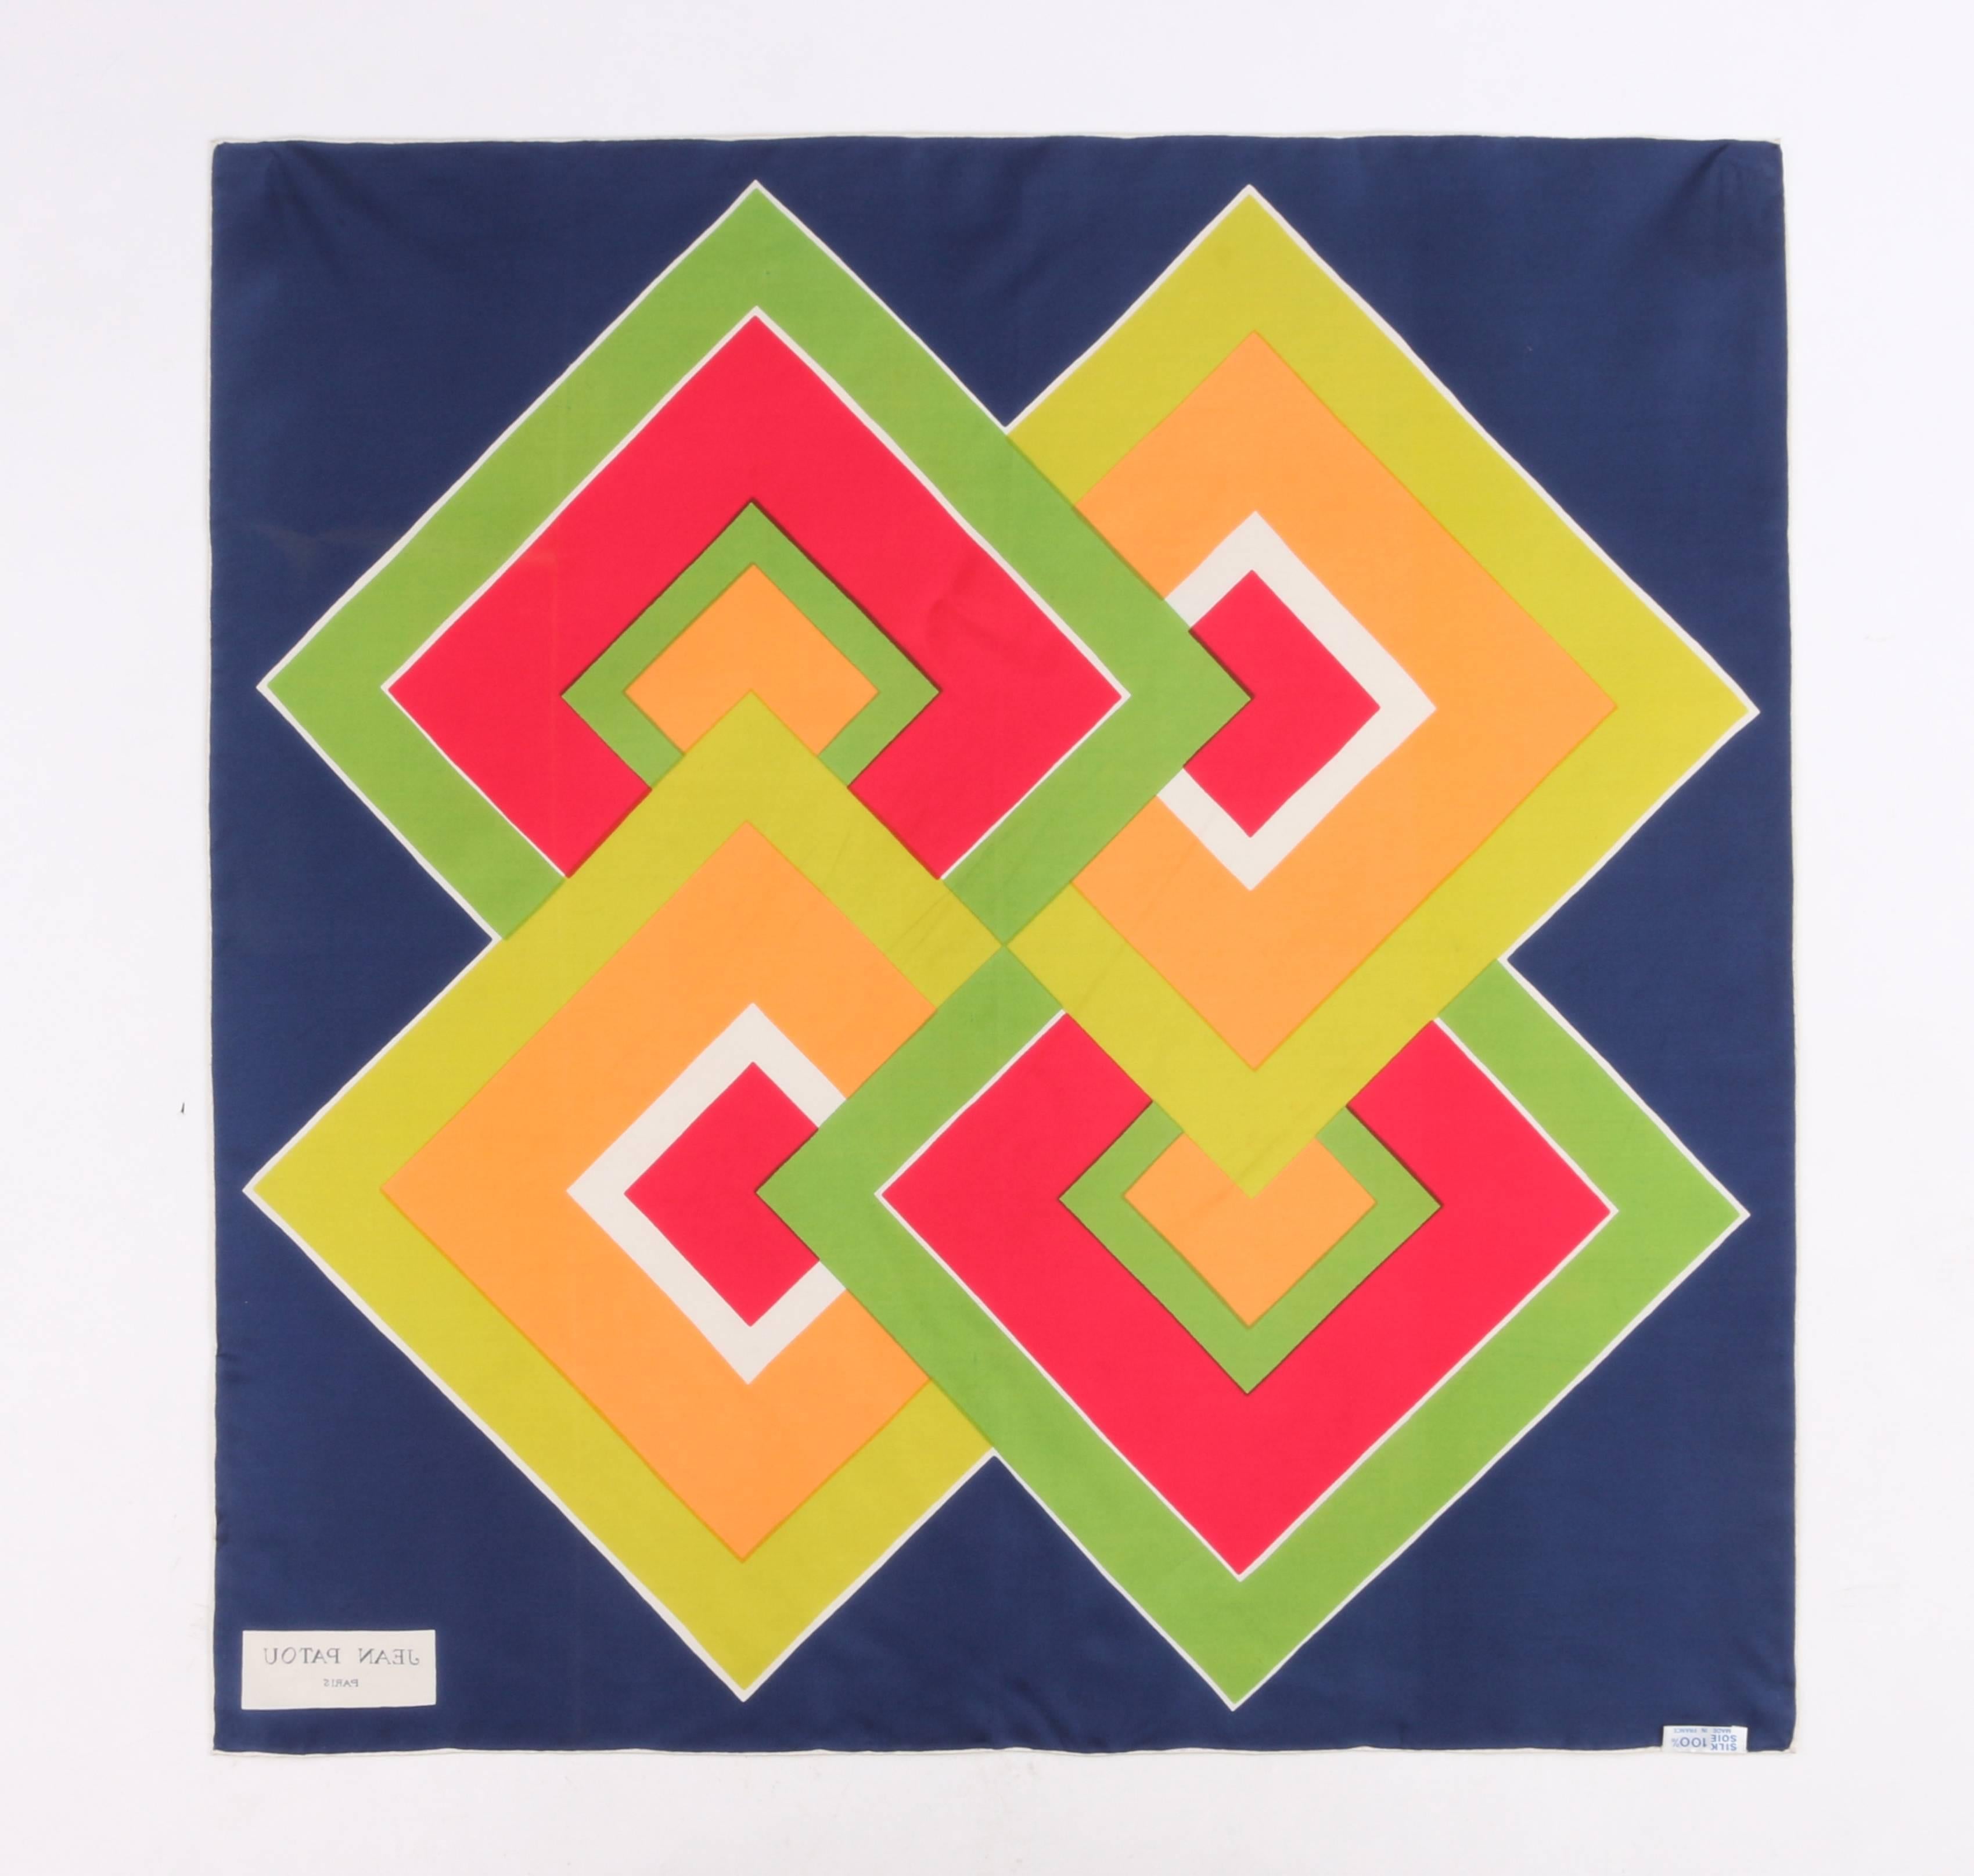 Vintage Jean Patou c.1960's navy blue geometric op art print silk scarf. Designed by Michel Goma. Navy blue background. Central overlapping square op art print at center in shades of yellow, orange, green, fuschia, and white. White hand rolled edge.